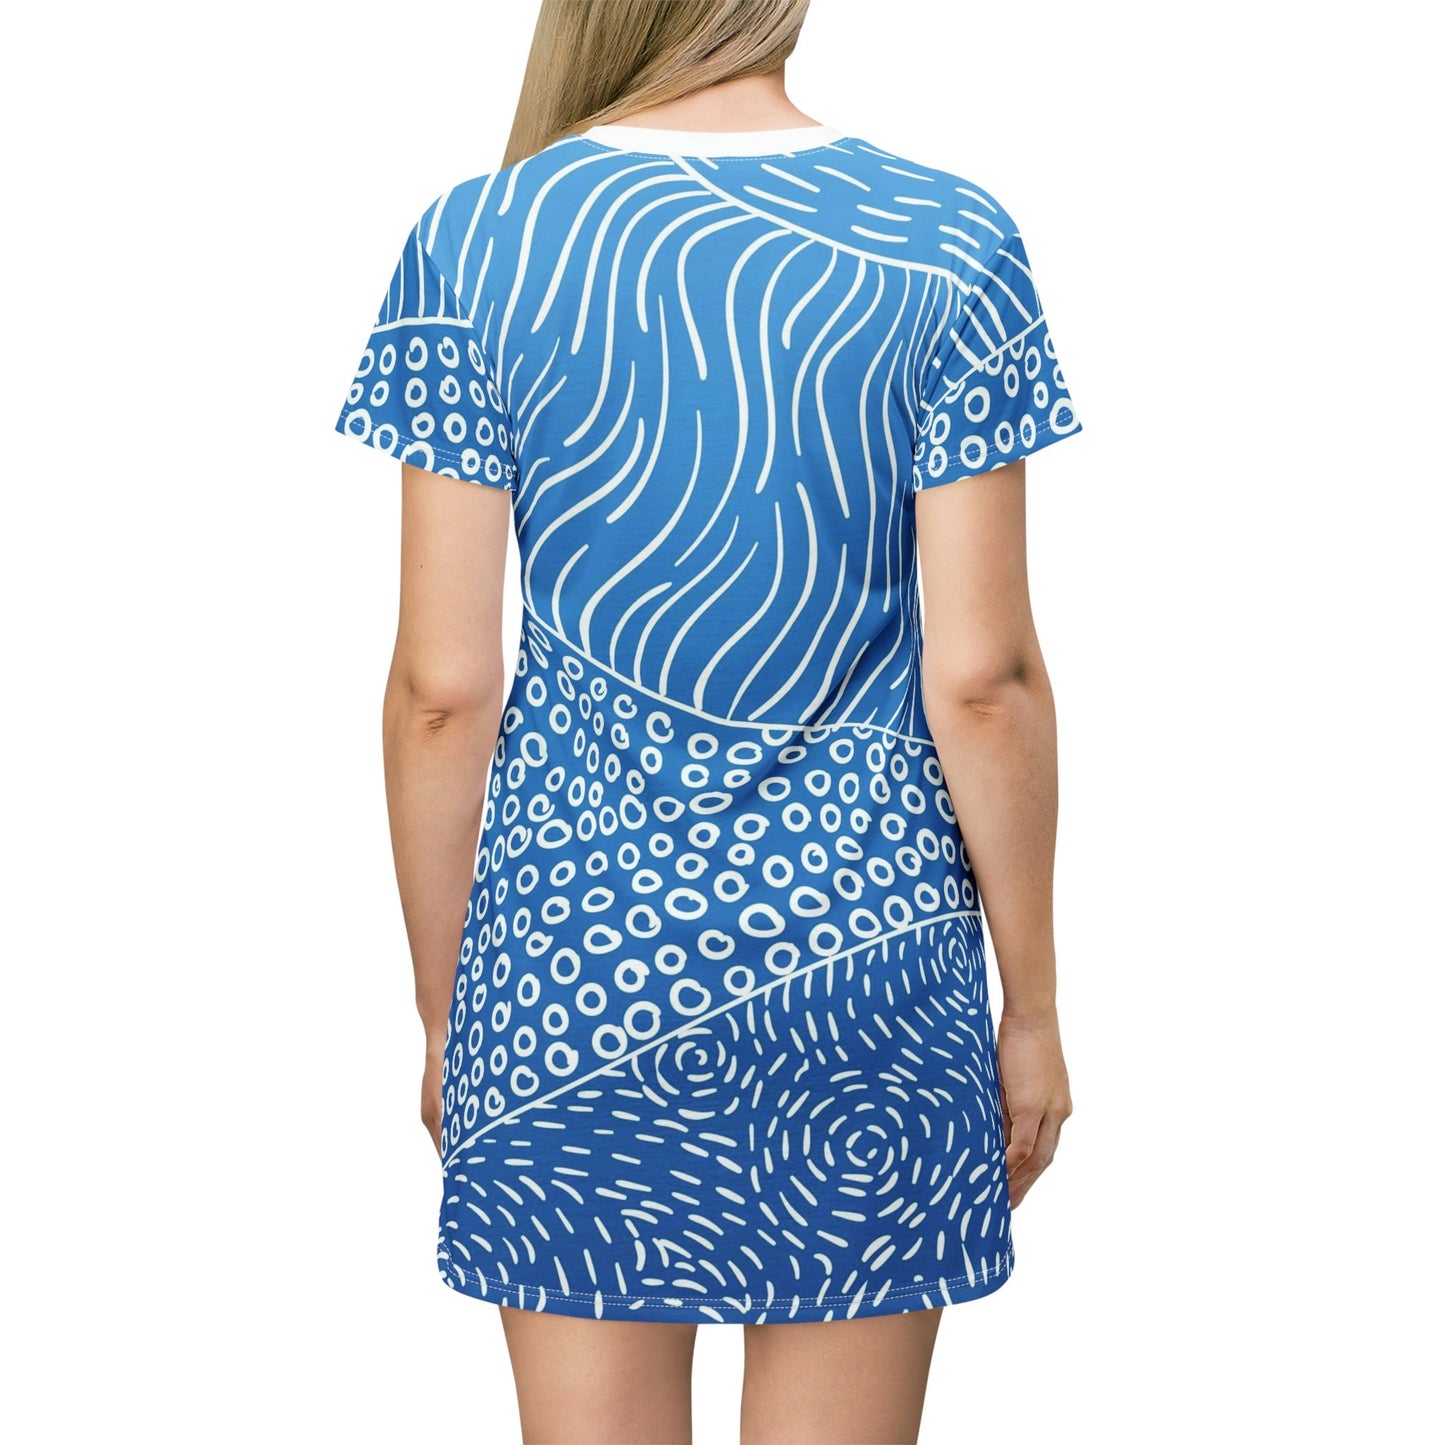 T-Shirt Dress - Blue and White Abstract